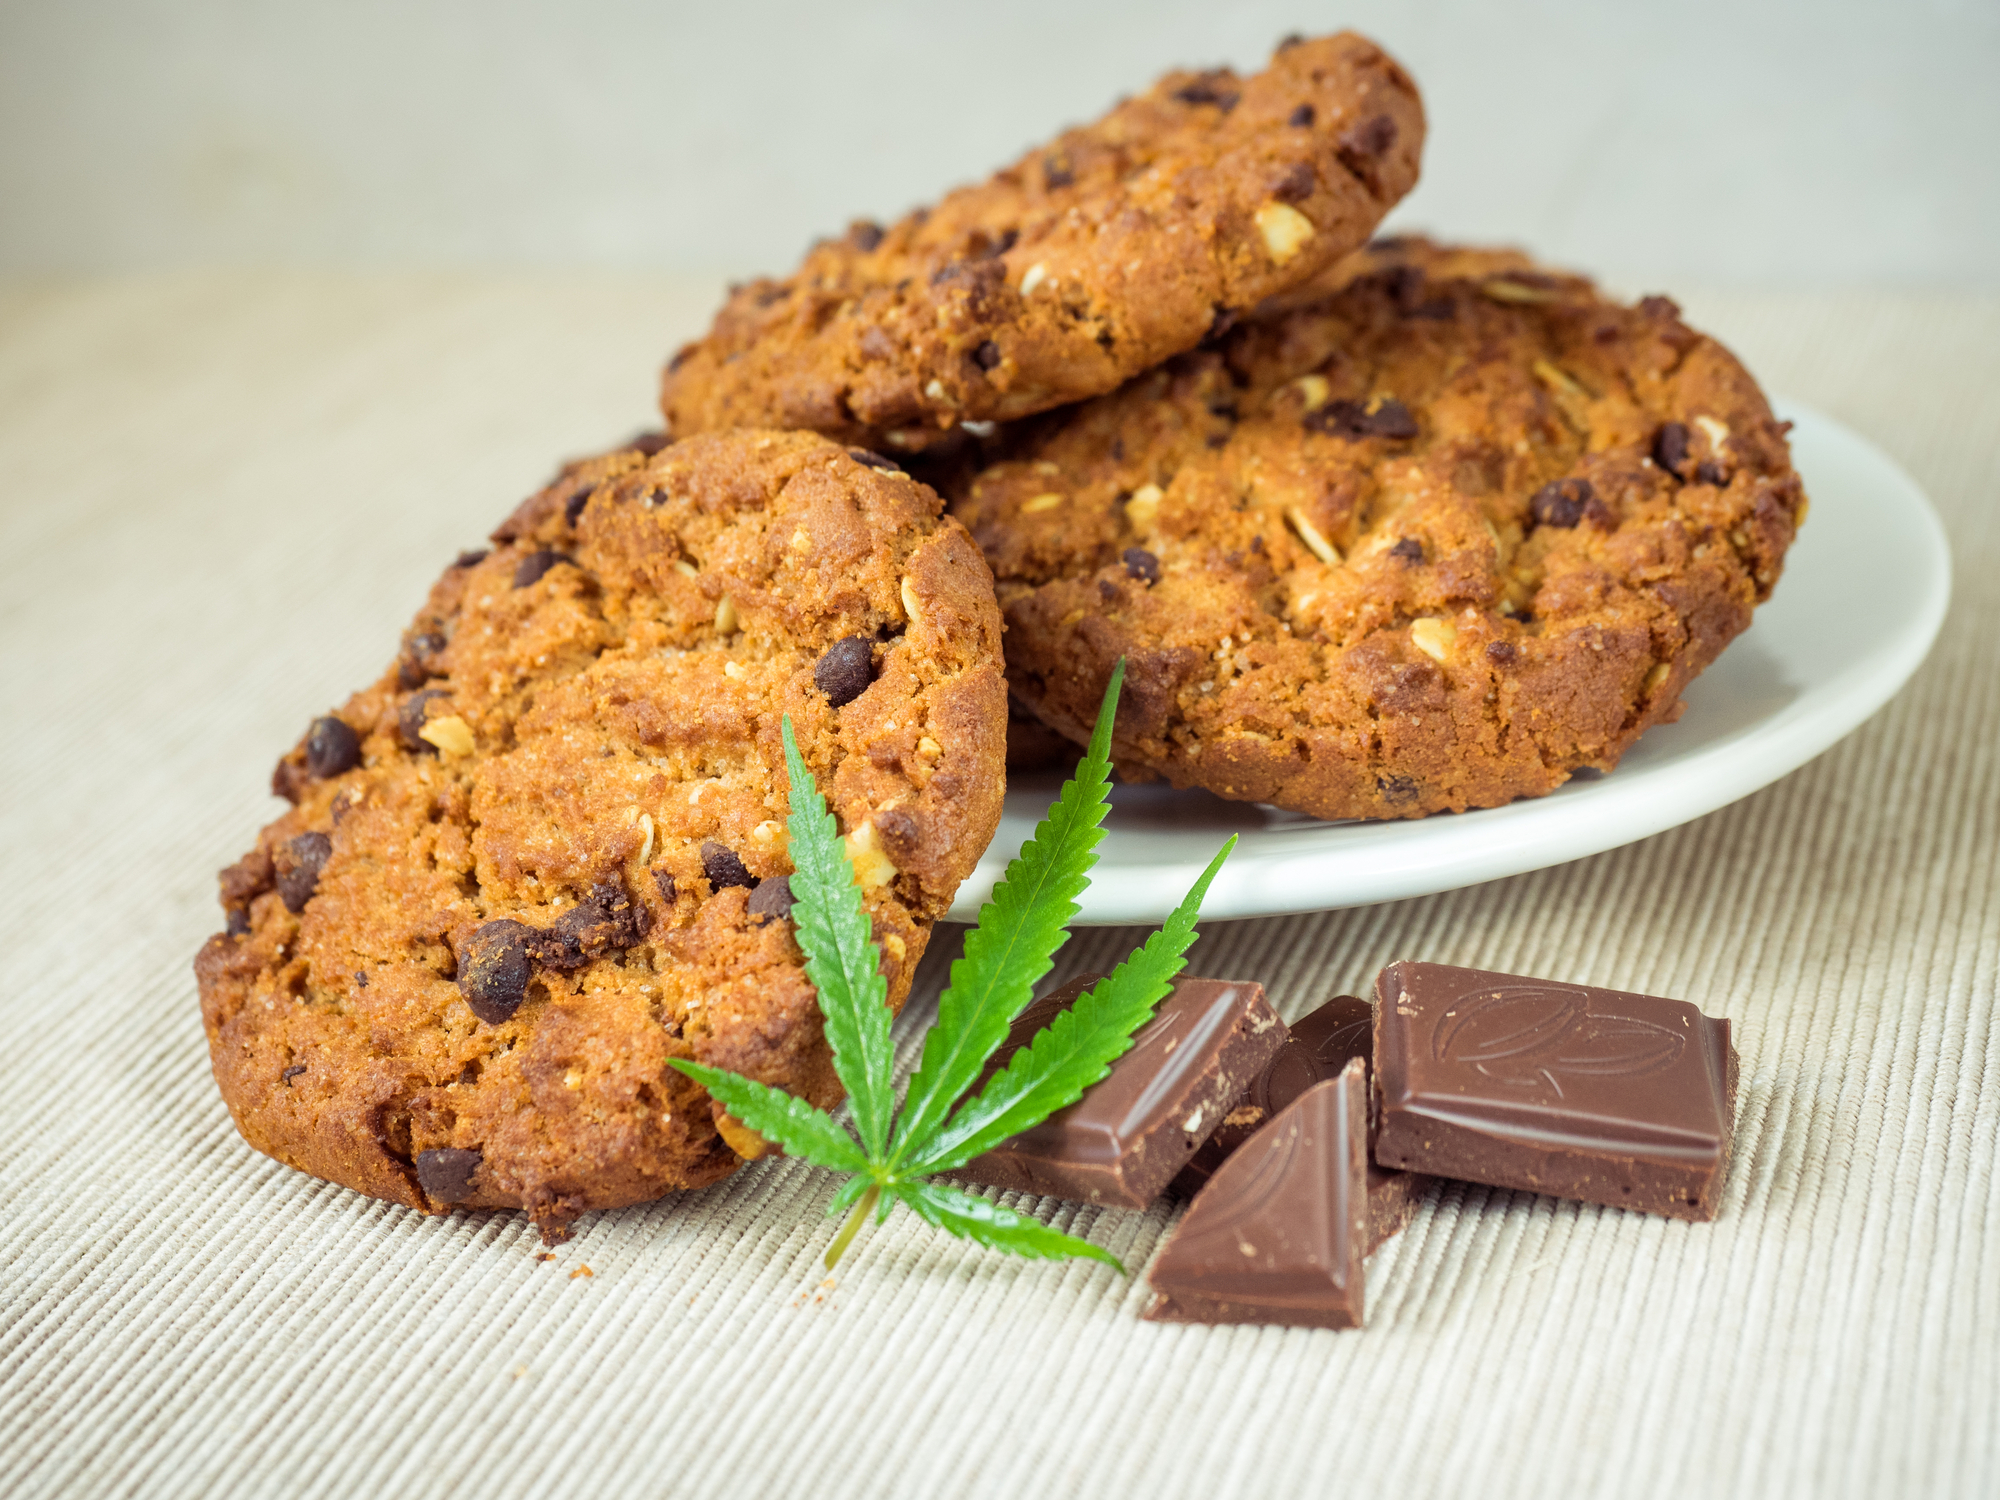 Delicious homemade Chocolate chip Cookies with CBD cannabis and